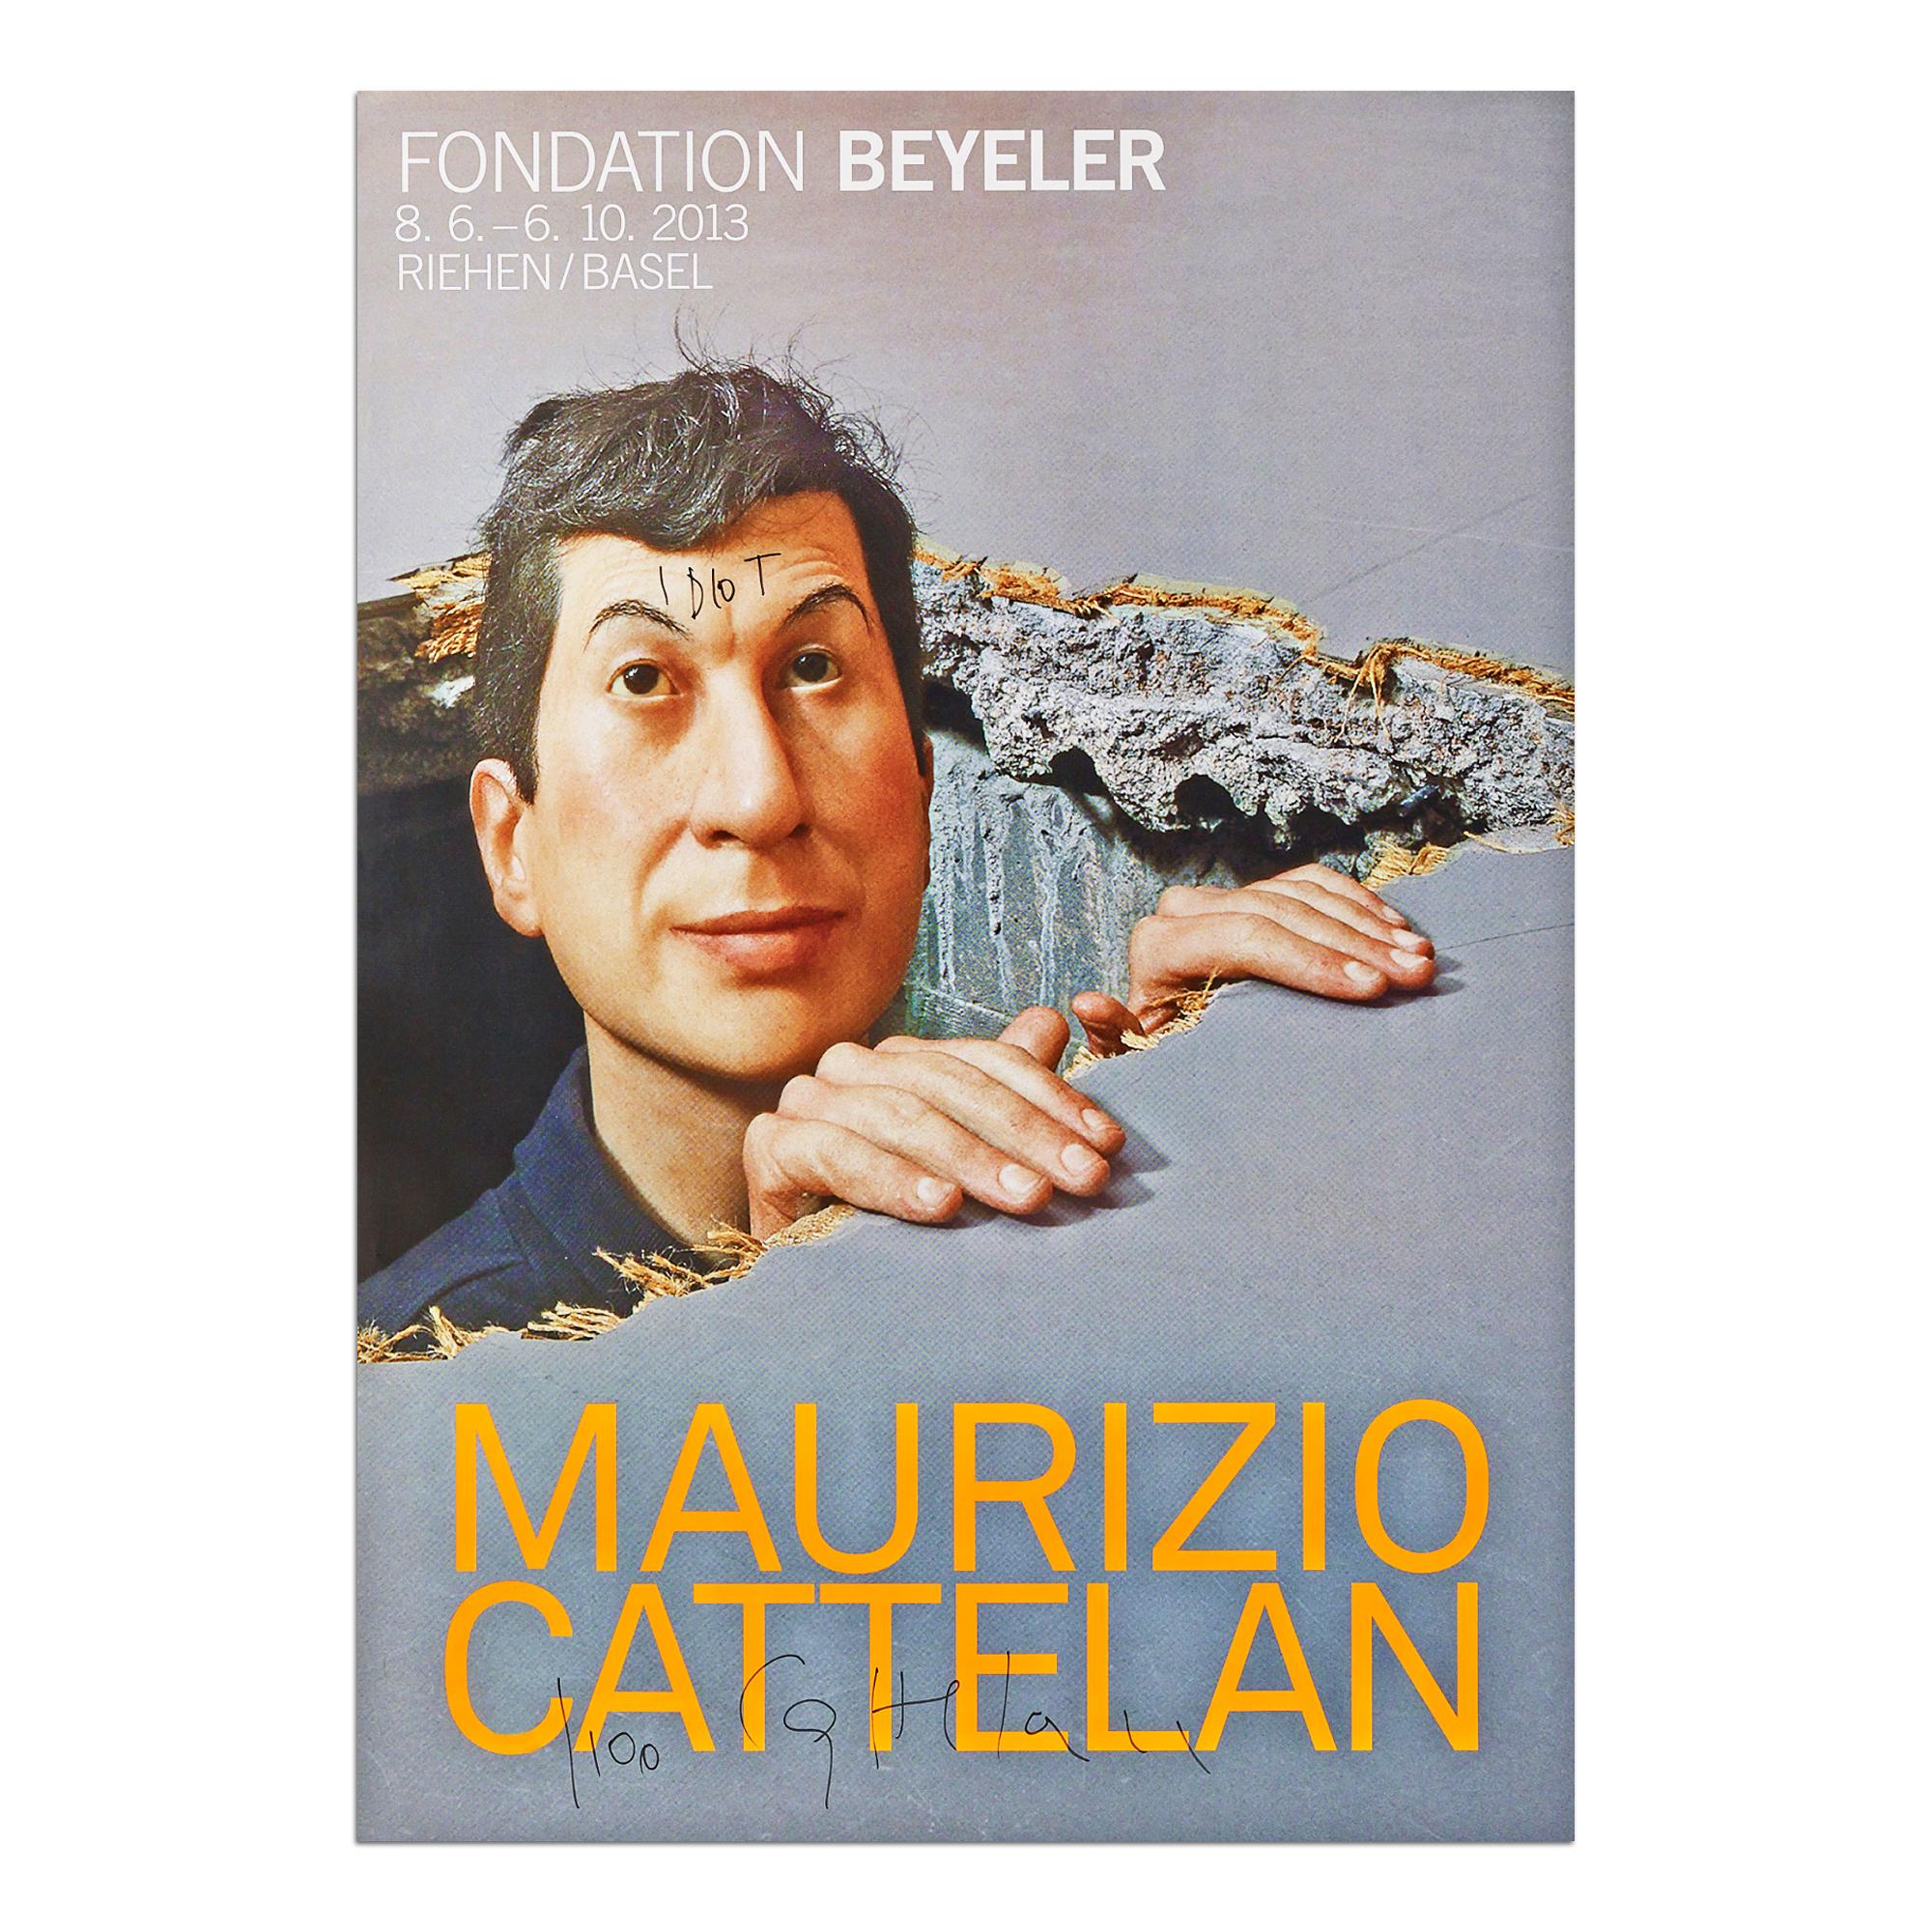 Maurizio Cattelan (Italian, b. 1960)
Fondation Beyeler exhibition poster, 2013
Dimensions: 128 x 90 cm
Edition of 100: Hand-signed and numbered in black felt-tip pen
Condition: Mint